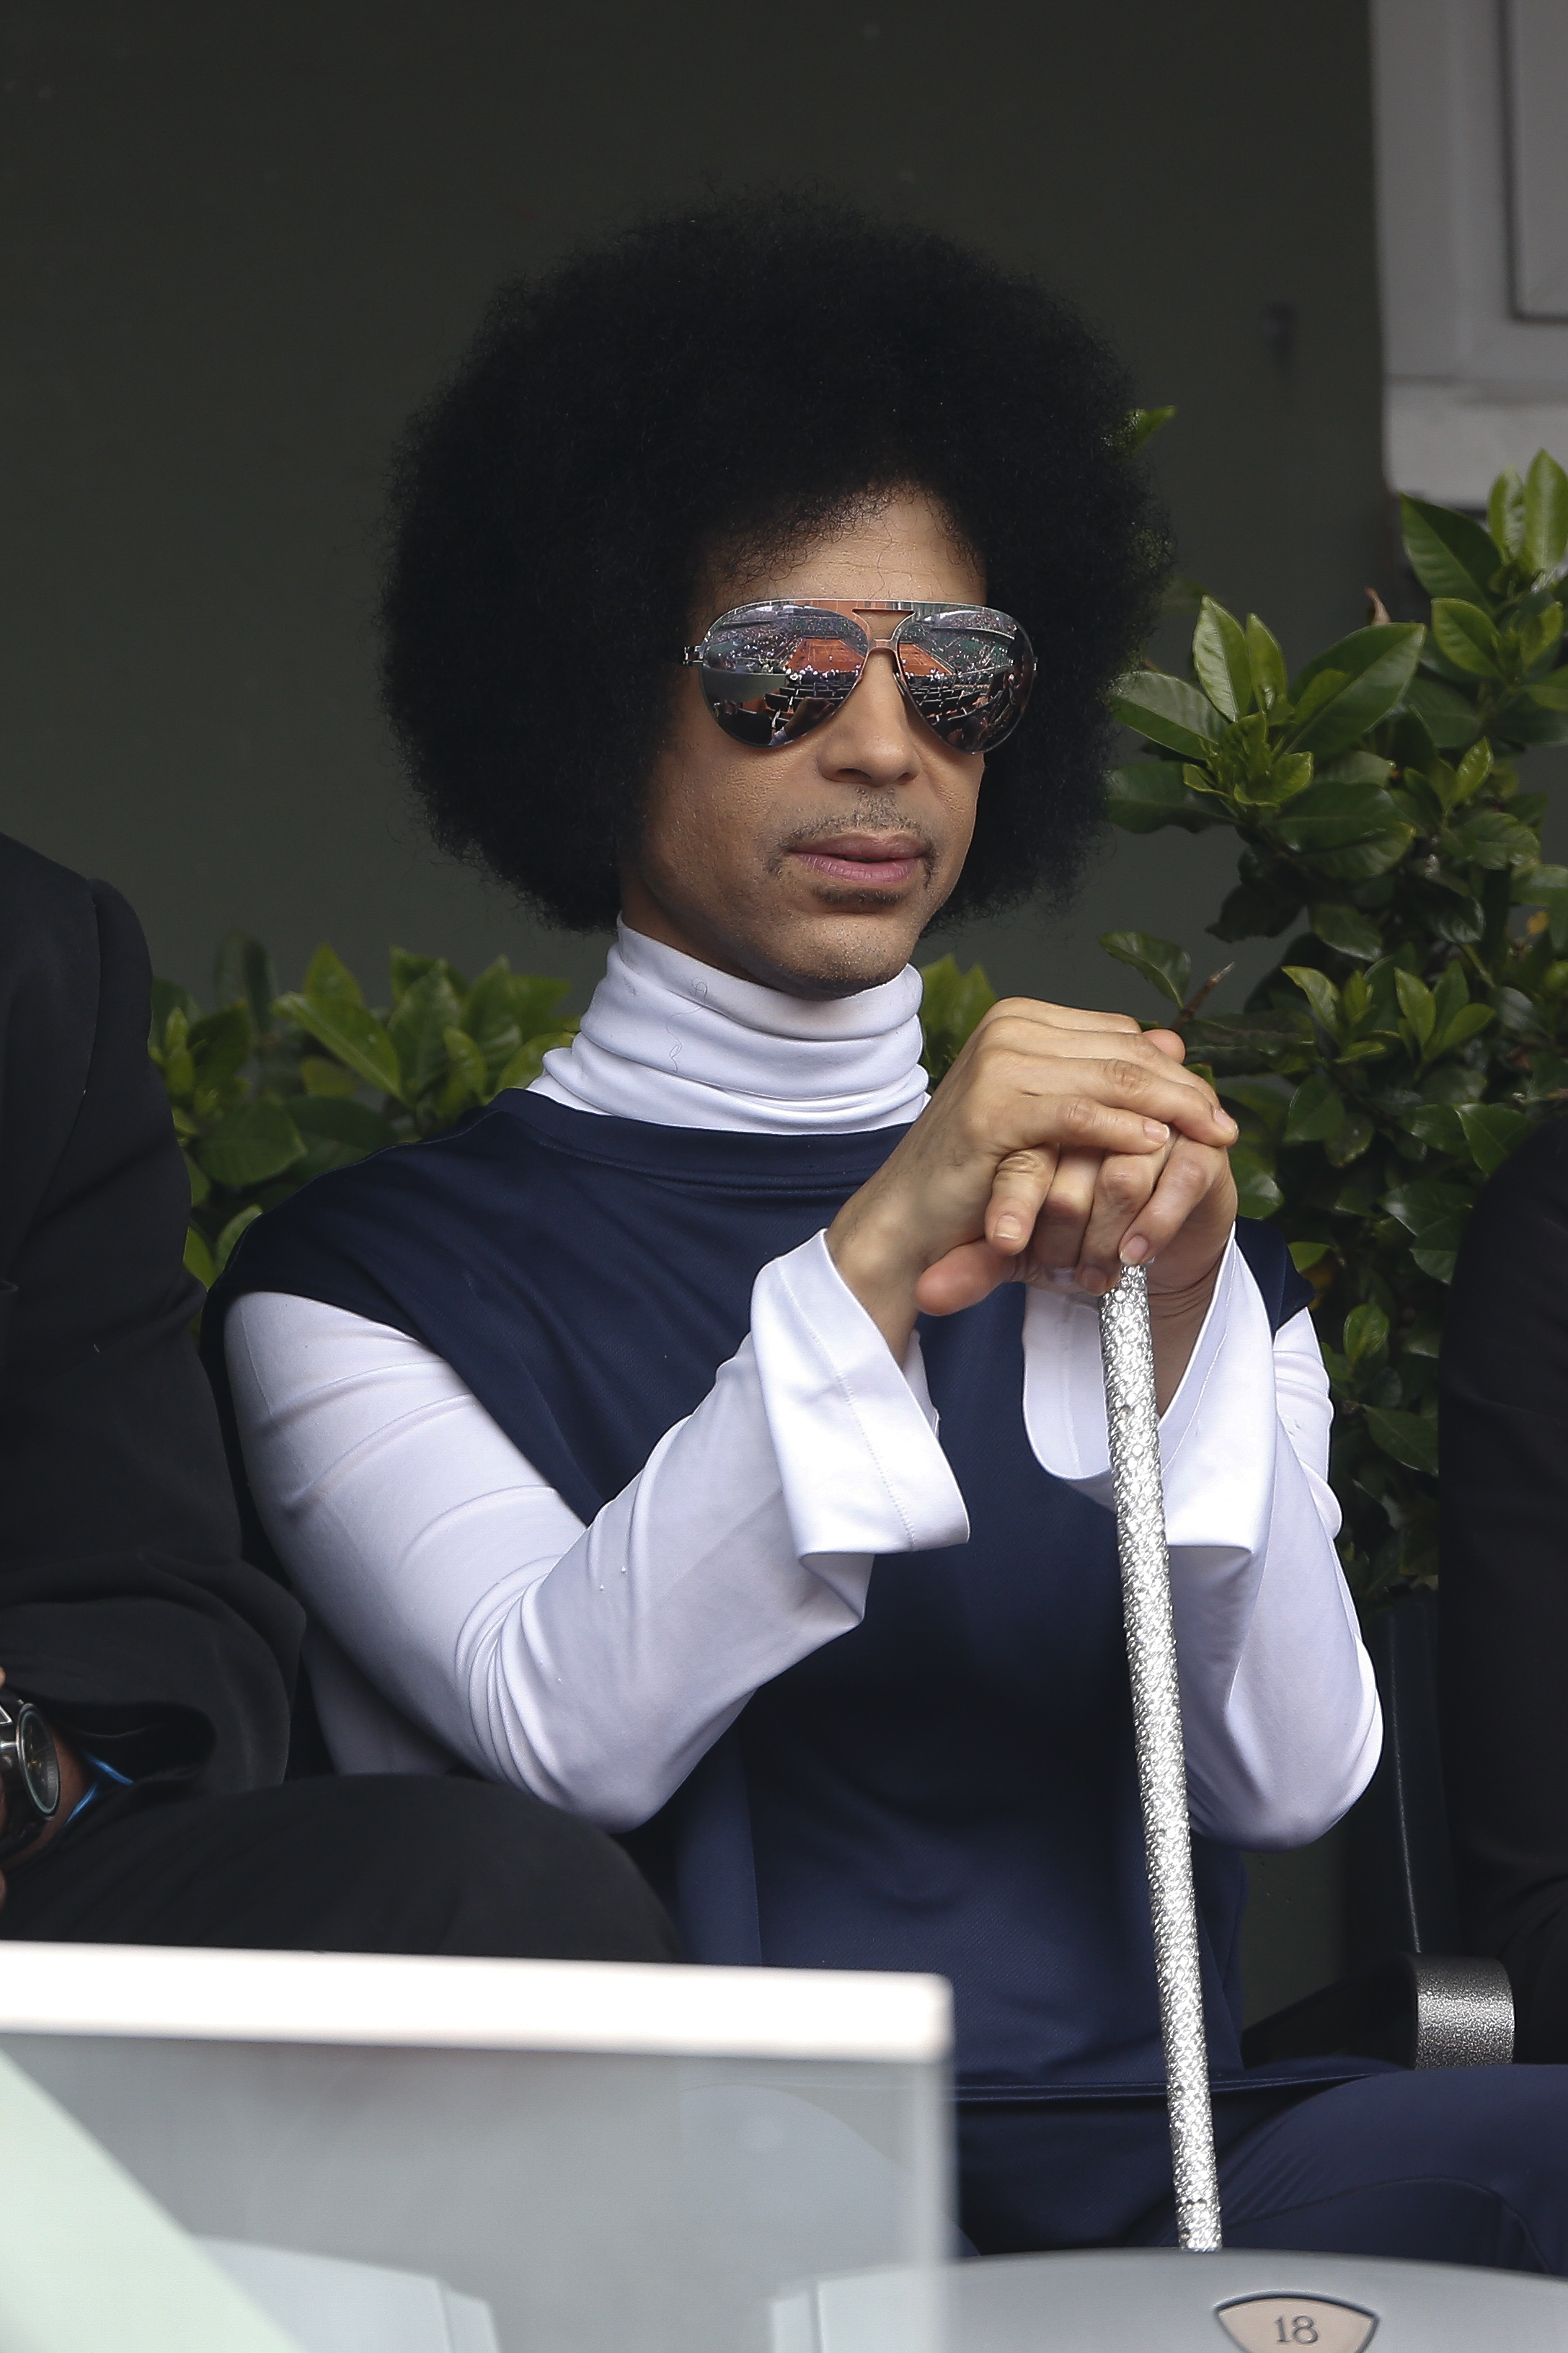 Prince at the 2014 French Open (1)